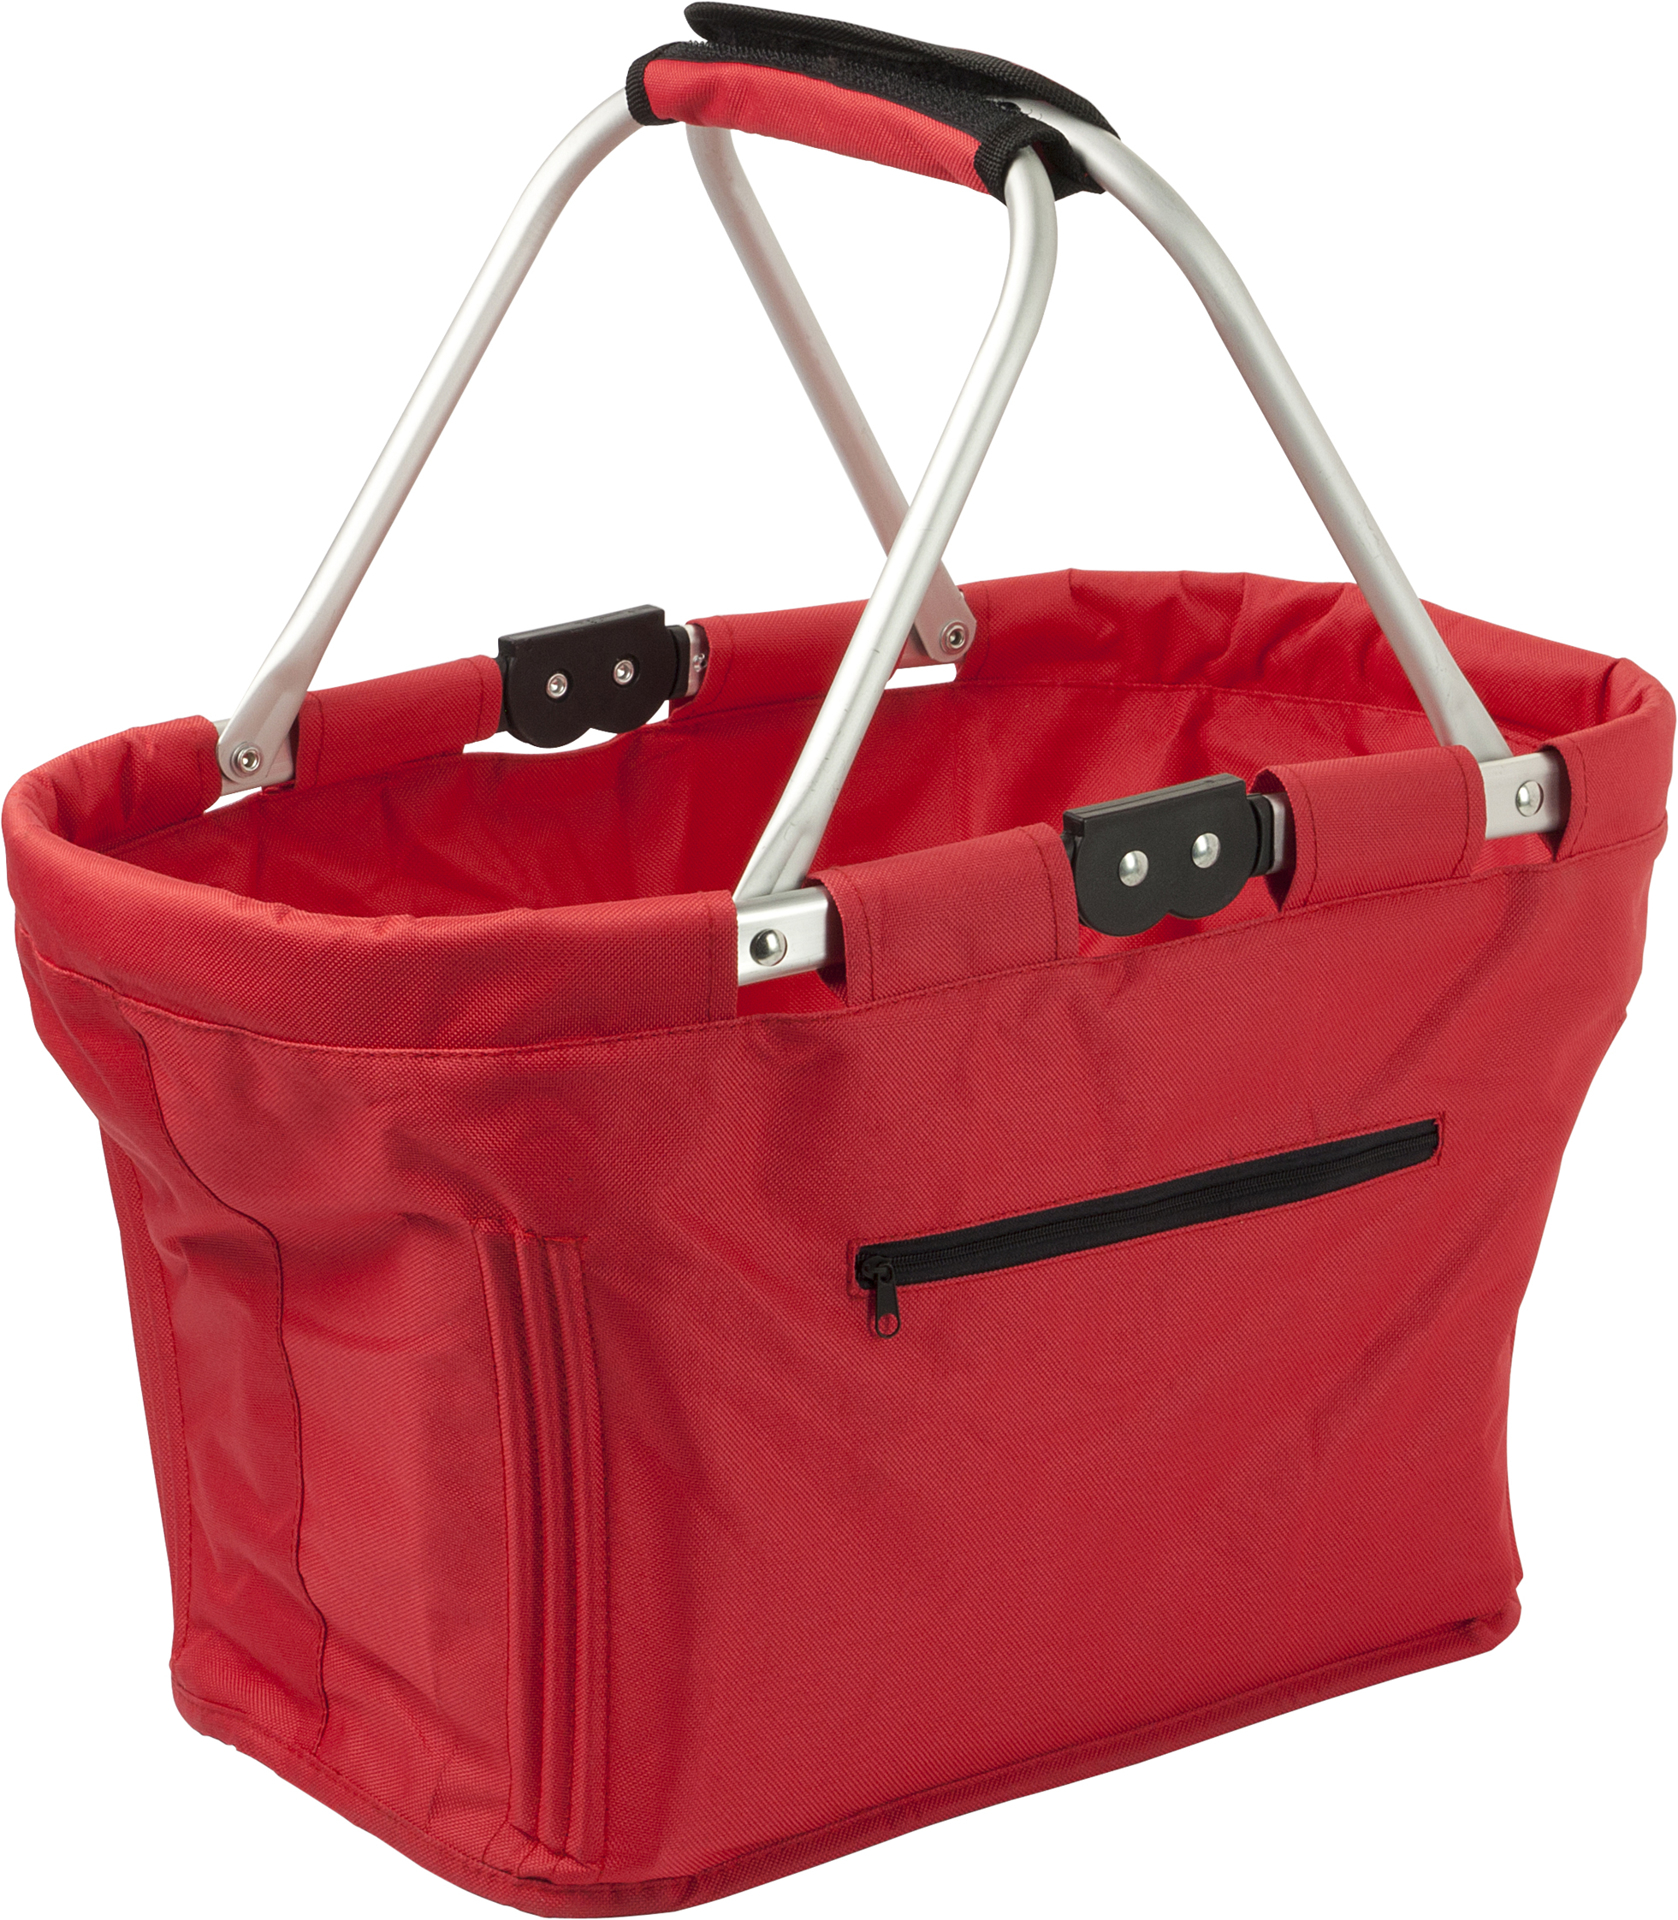 Red shopping basket with black trim details and zip compartment to the front